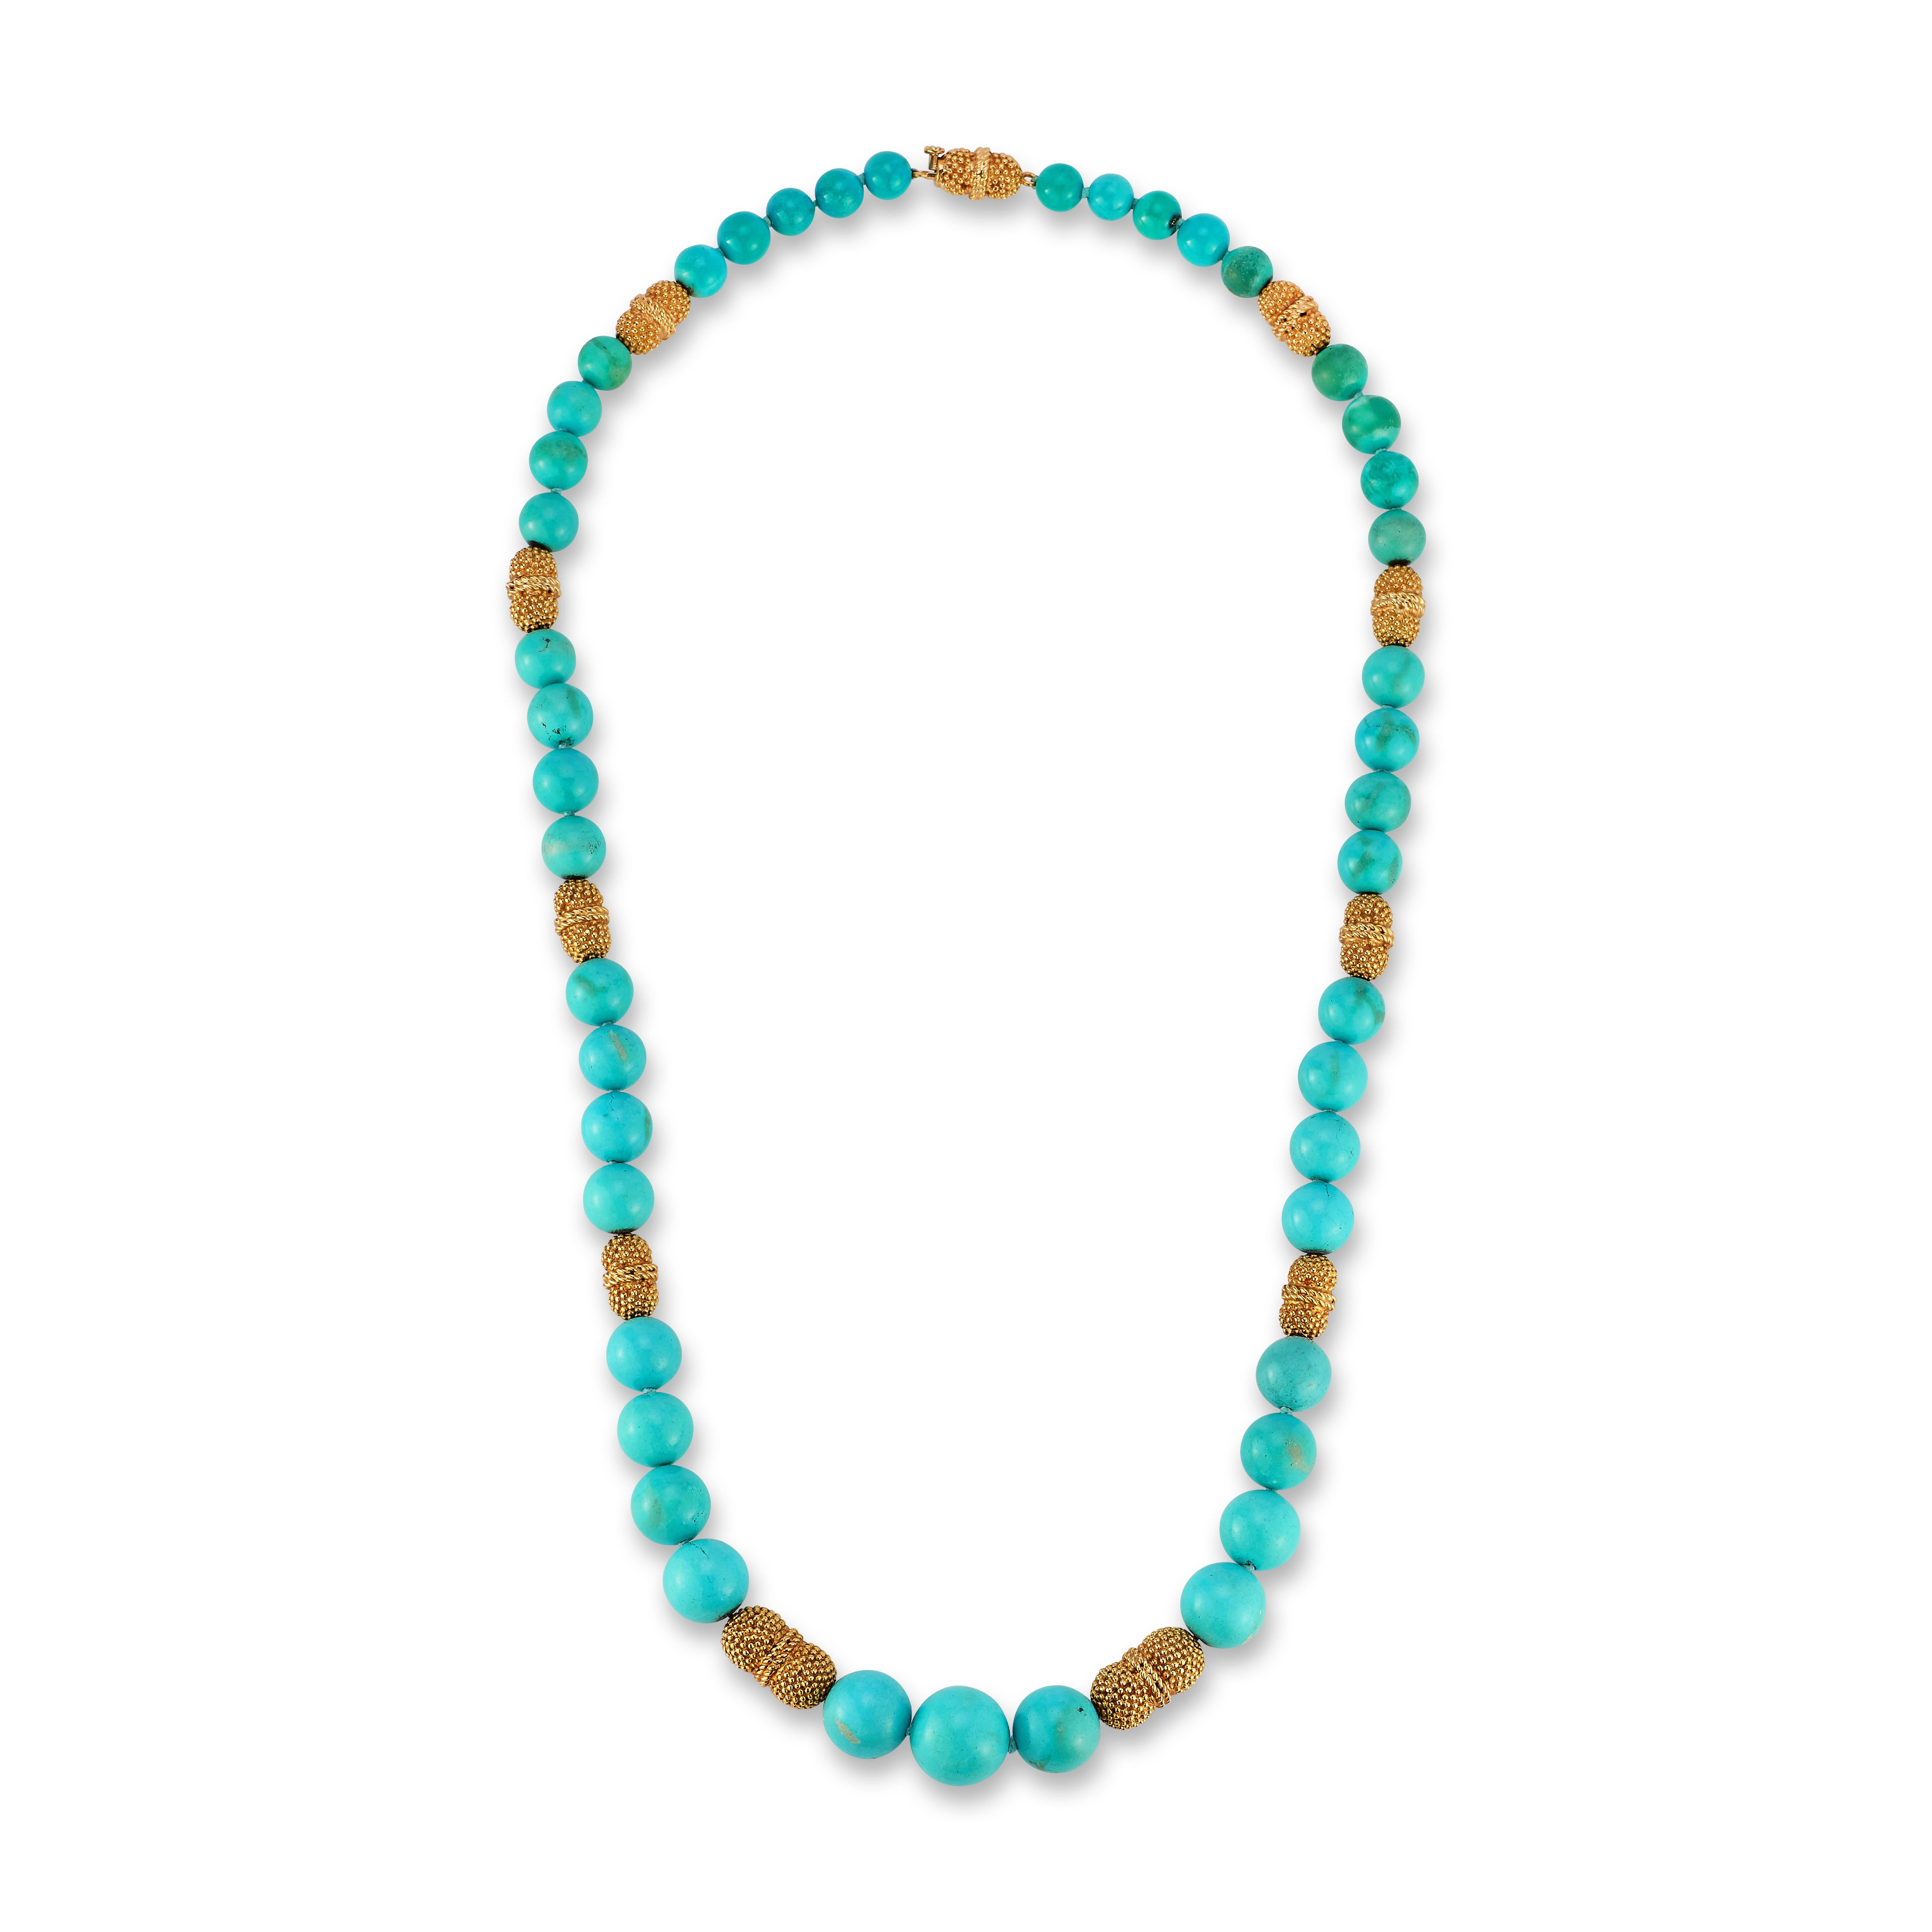 Van Cleef & Arpels Turquoise Bead Necklace 

A necklace of turquoise beads and gold spacers 

Signed VCA NY and numbered

Length: 25